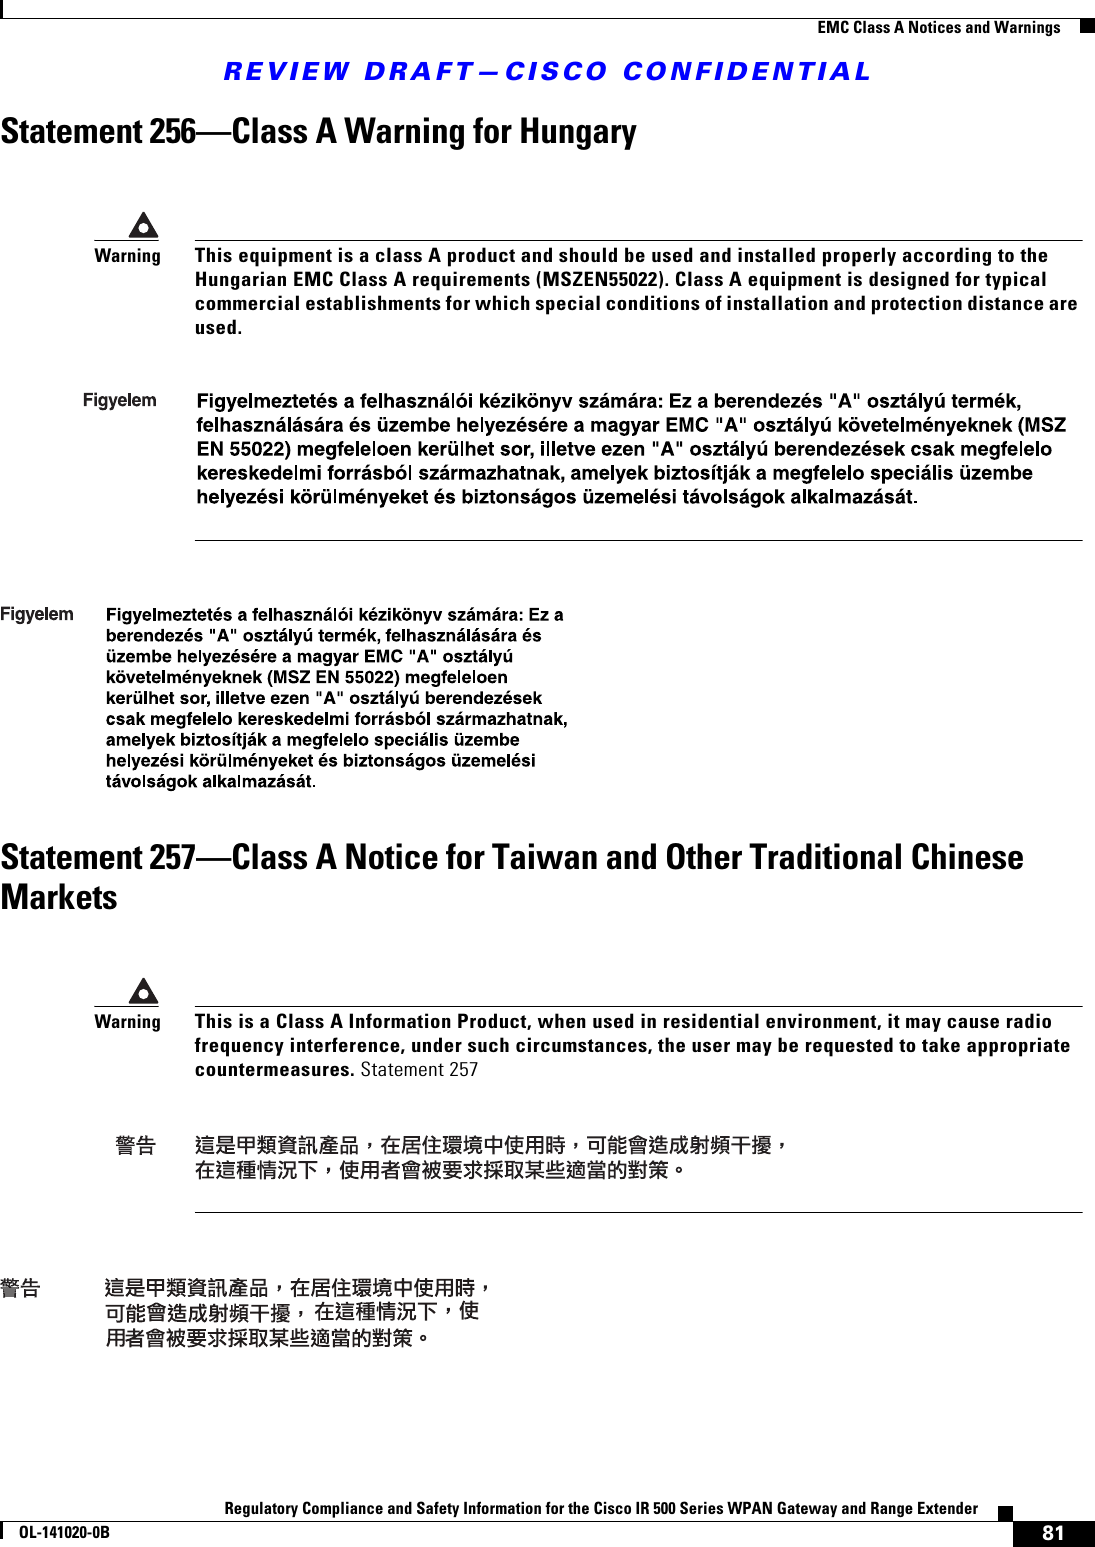 REVIEW DRAFT—CISCO CONFIDENTIAL81Regulatory Compliance and Safety Information for the Cisco IR 500 Series WPAN Gateway and Range ExtenderOL-141020-0B  EMC Class A Notices and WarningsStatement 256—Class A Warning for HungaryStatement 257—Class A Notice for Taiwan and Other Traditional Chinese MarketsWarningThis equipment is a class A product and should be used and installed properly according to the Hungarian EMC Class A requirements (MSZEN55022). Class A equipment is designed for typical commercial establishments for which special conditions of installation and protection distance are used.WarningThis is a Class A Information Product, when used in residential environment, it may cause radio frequency interference, under such circumstances, the user may be requested to take appropriate countermeasures. Statement 257